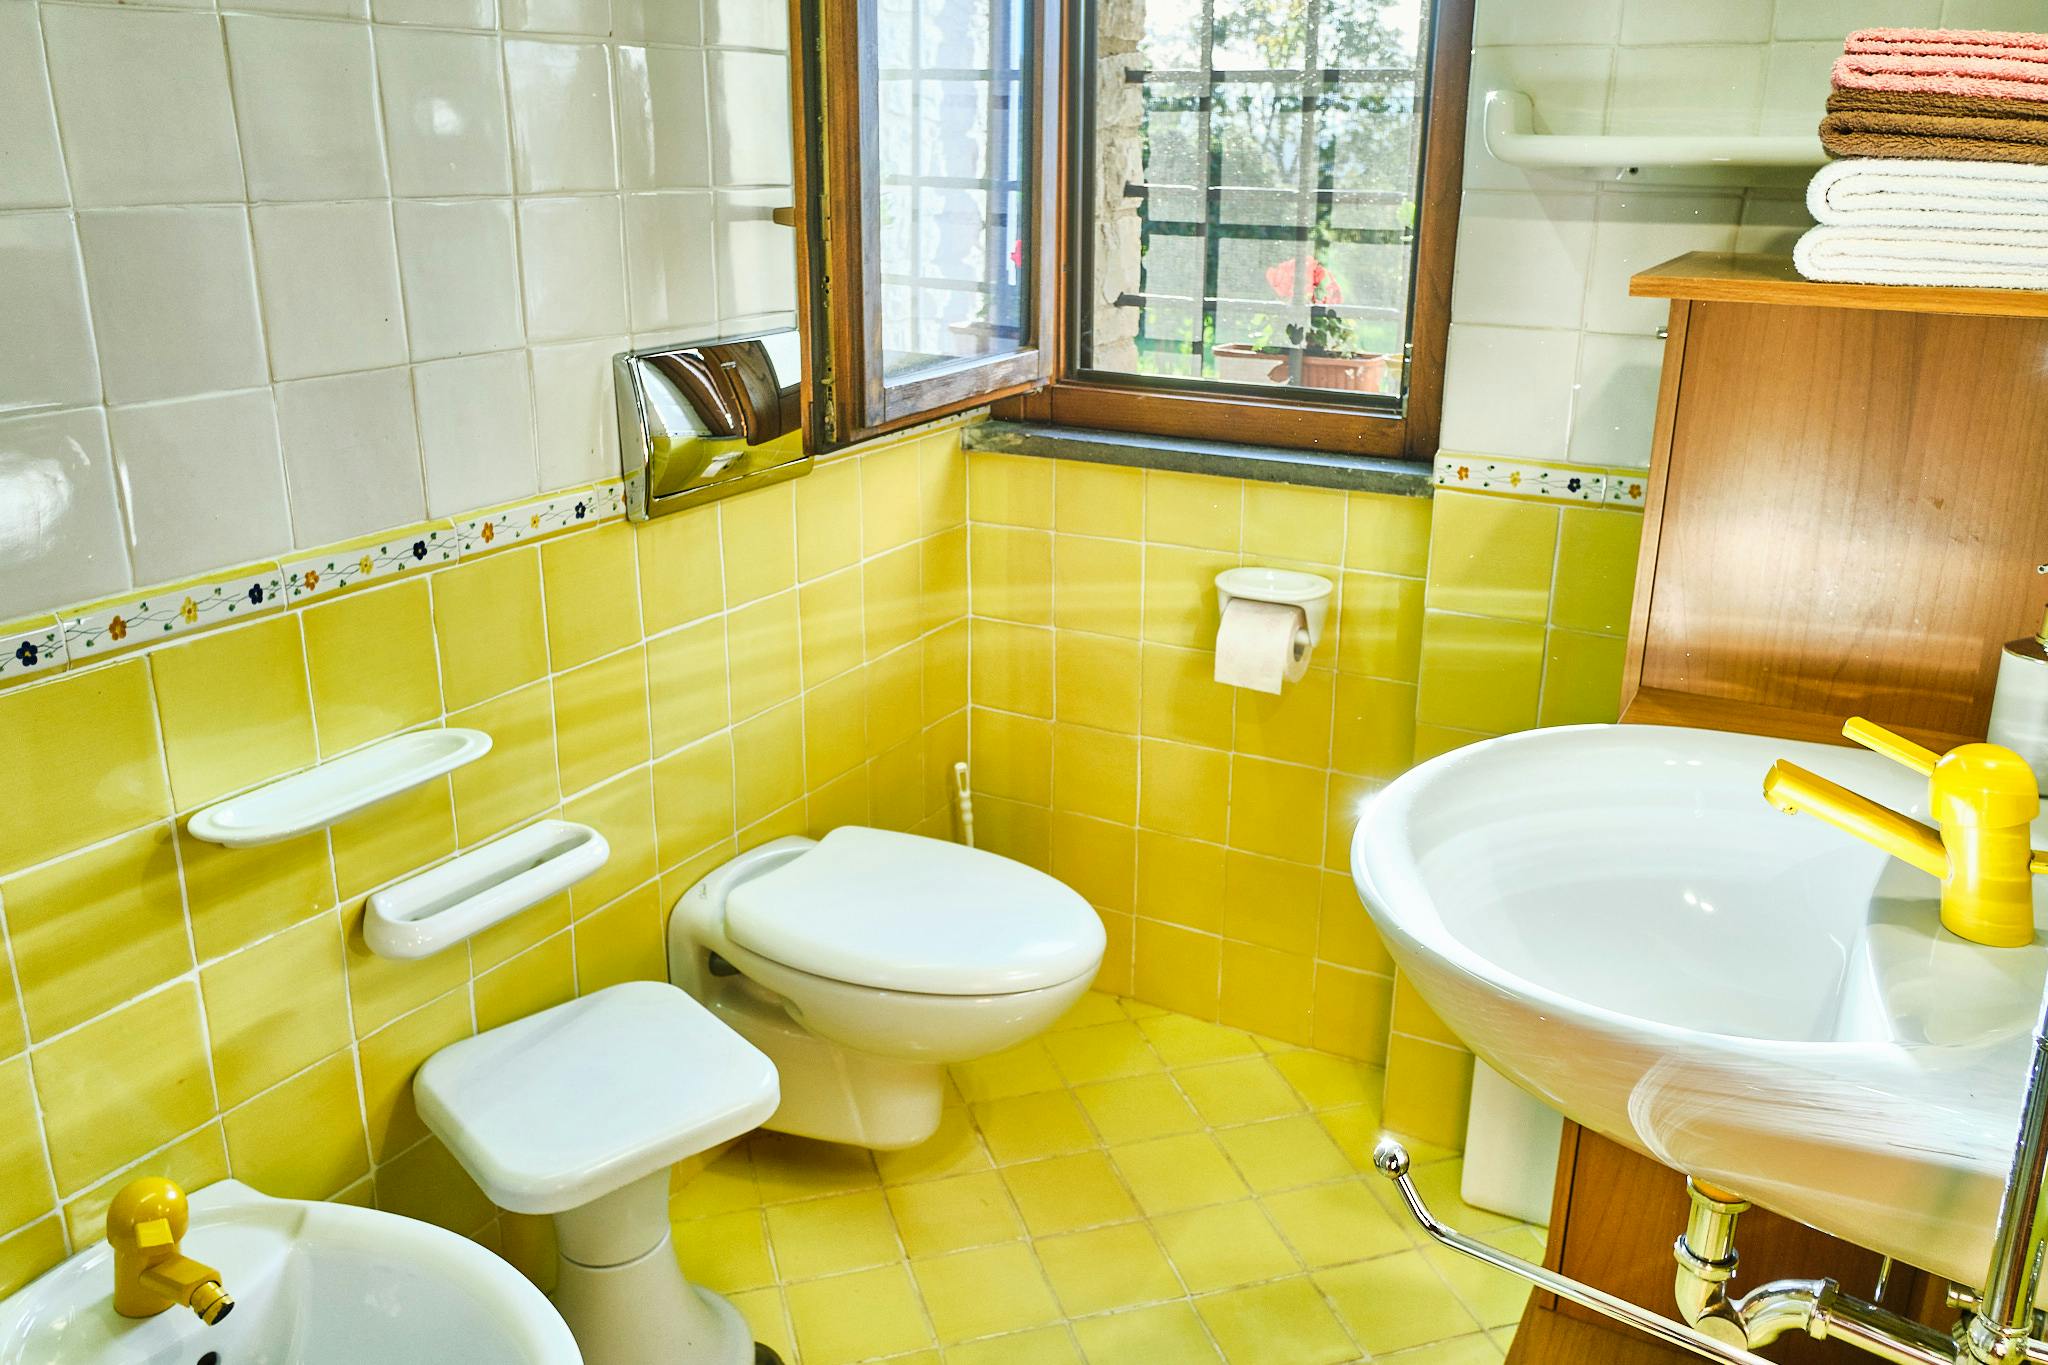 Overview of the bathroom of the Chalet